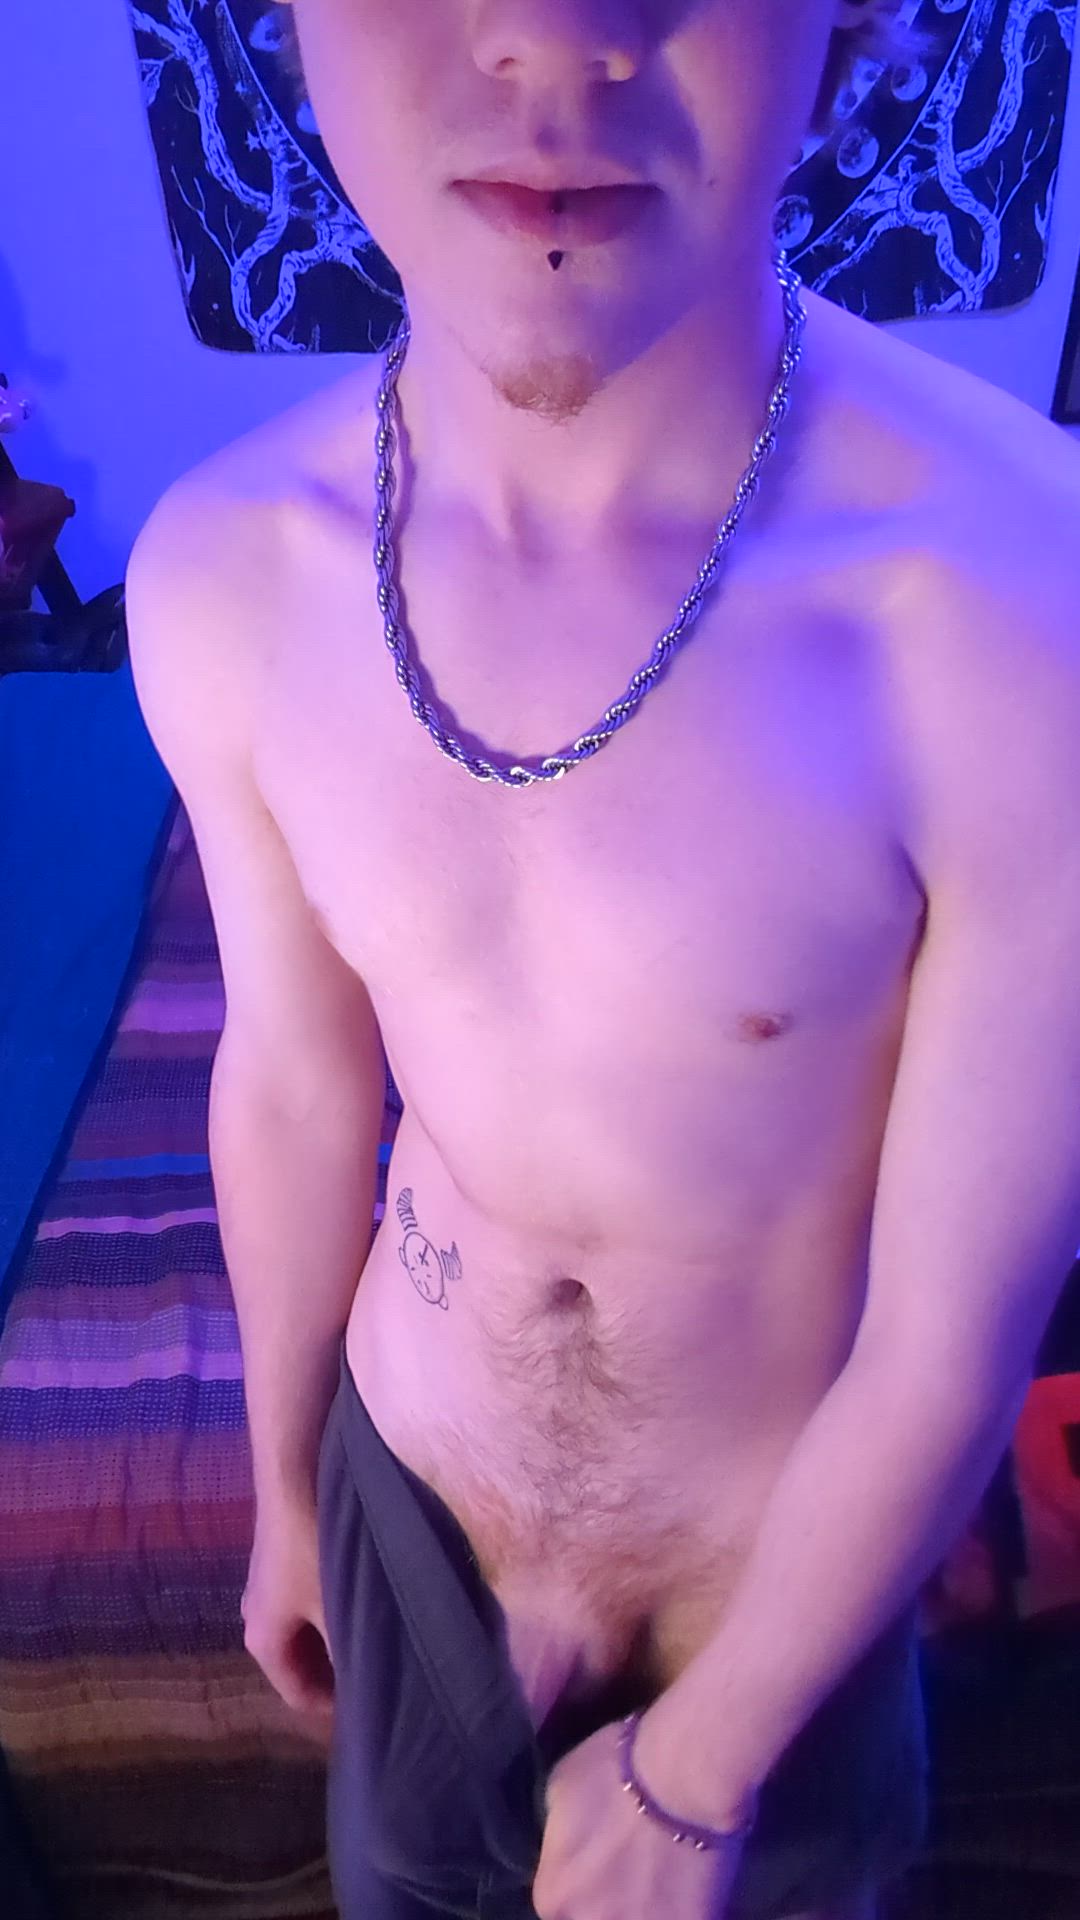 Amateur porn video with onlyfans model bielzebub <strong>@bielzebub</strong>